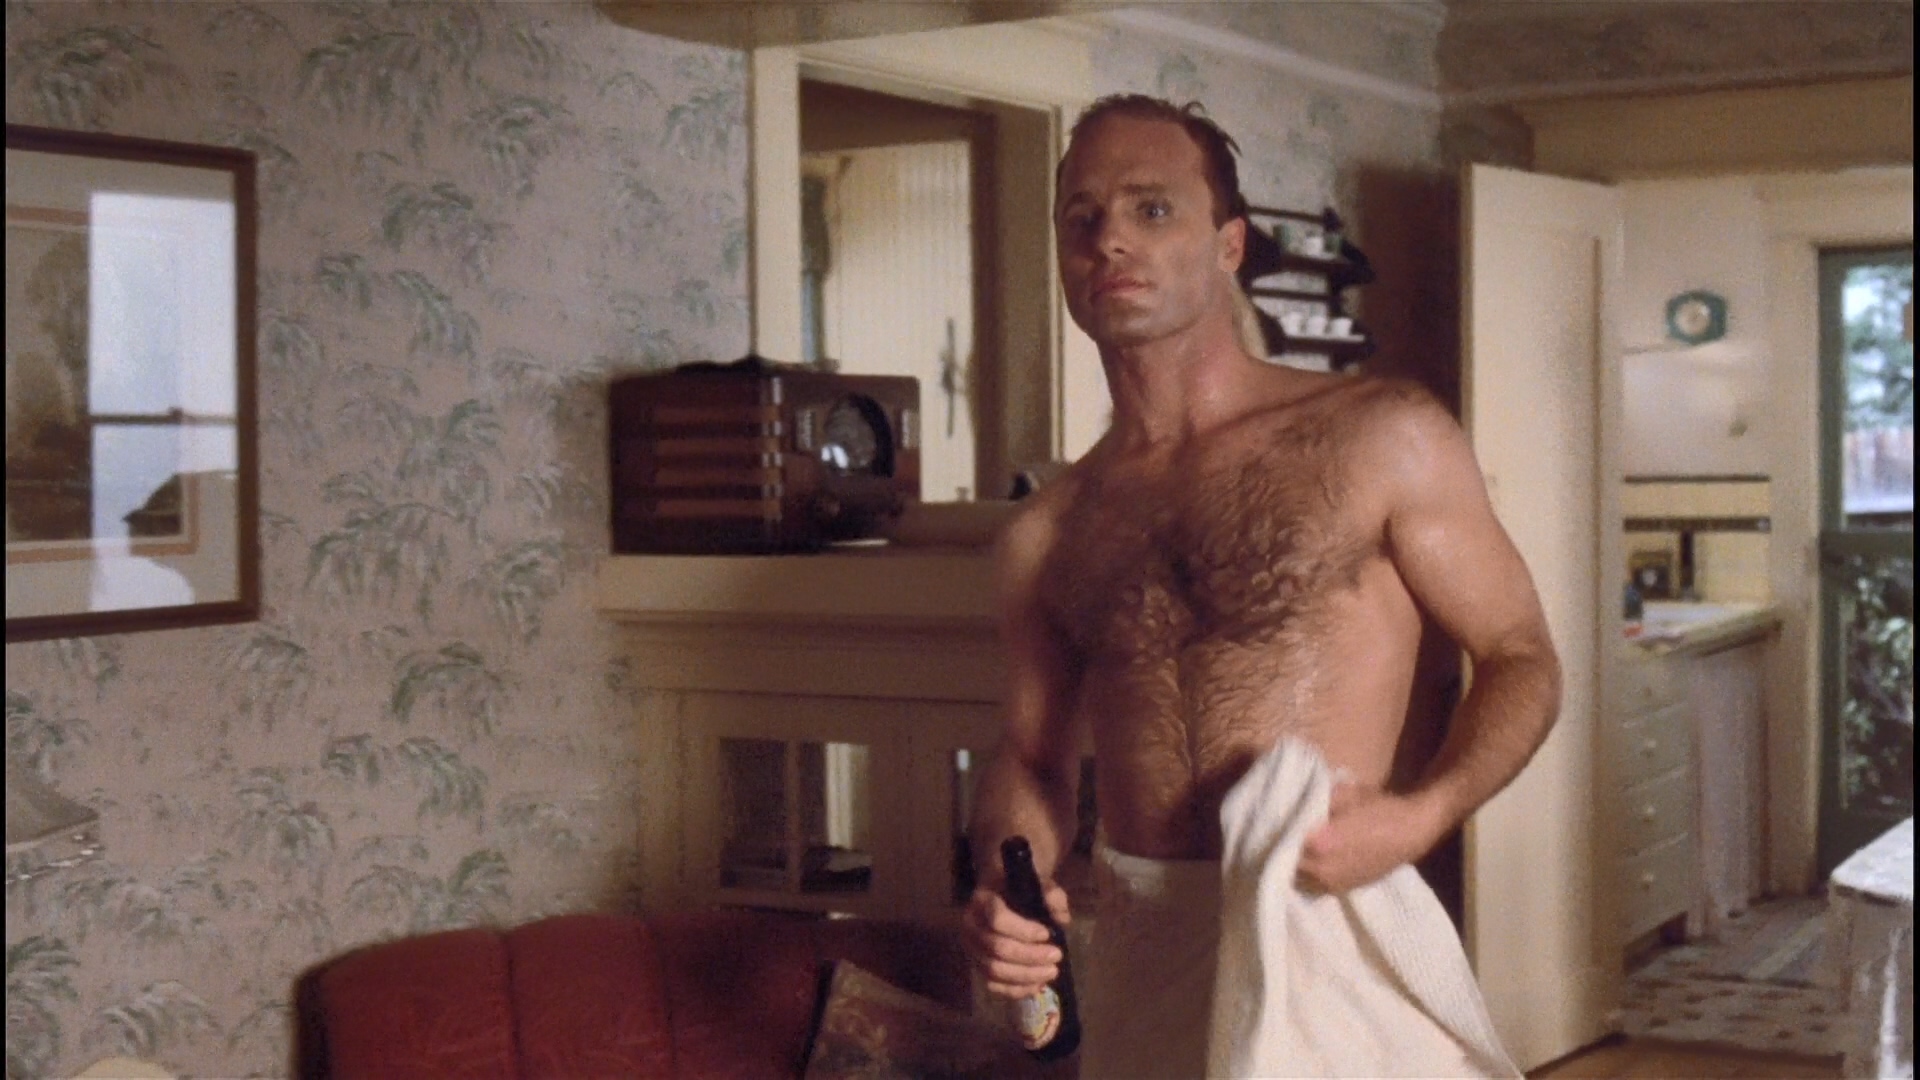 OMG, he’s naked RETRO EDITION: Ed Harris in 'Swing Shift' (1984) ...